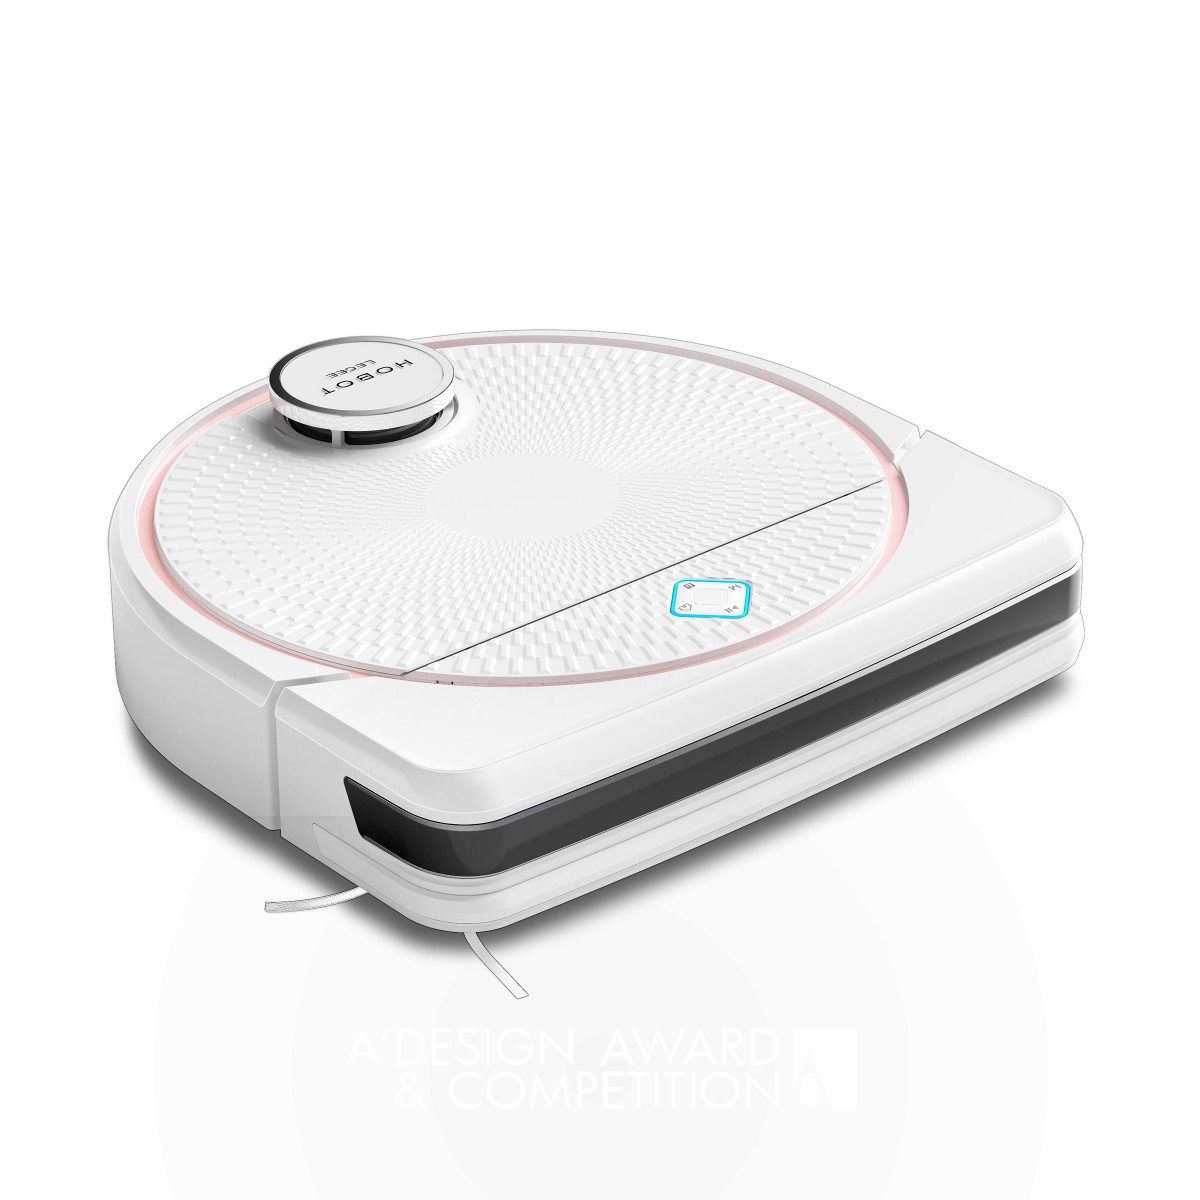 LegeeD7 Vacuum Mop Robot by Hobot Technology Inc.